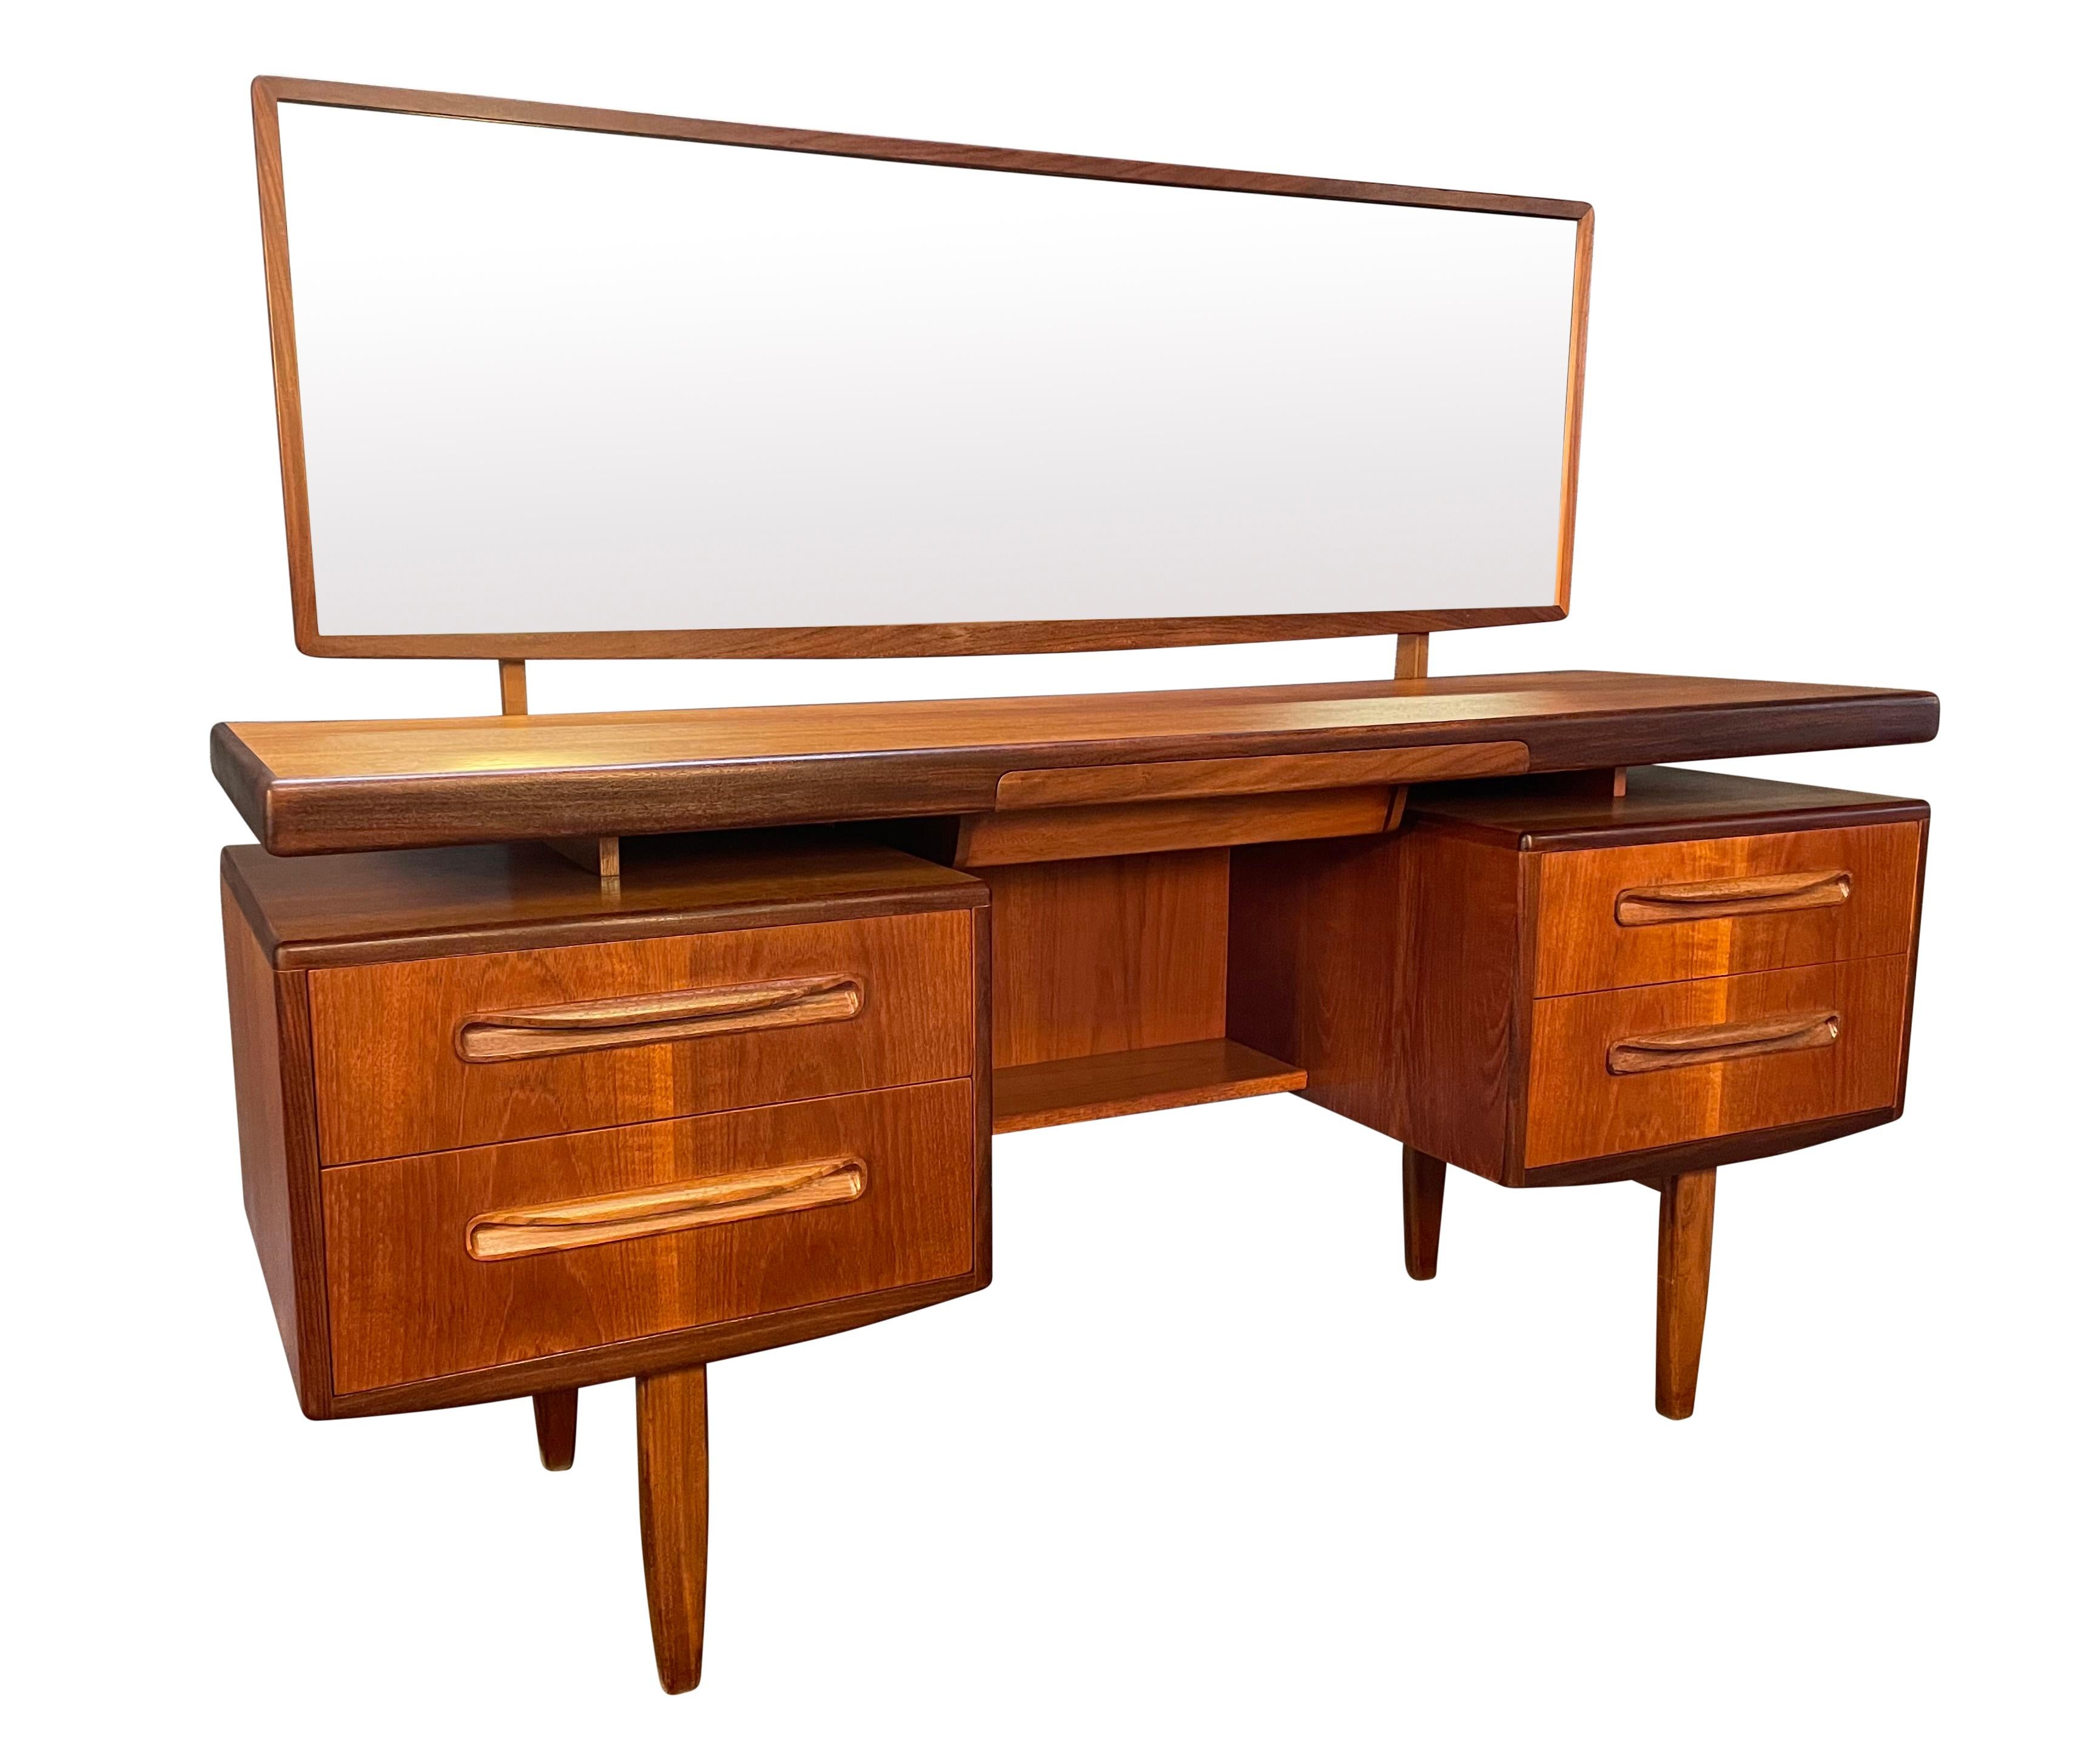 Here is a beautiful British mid century modern vanity in teak wood from the 